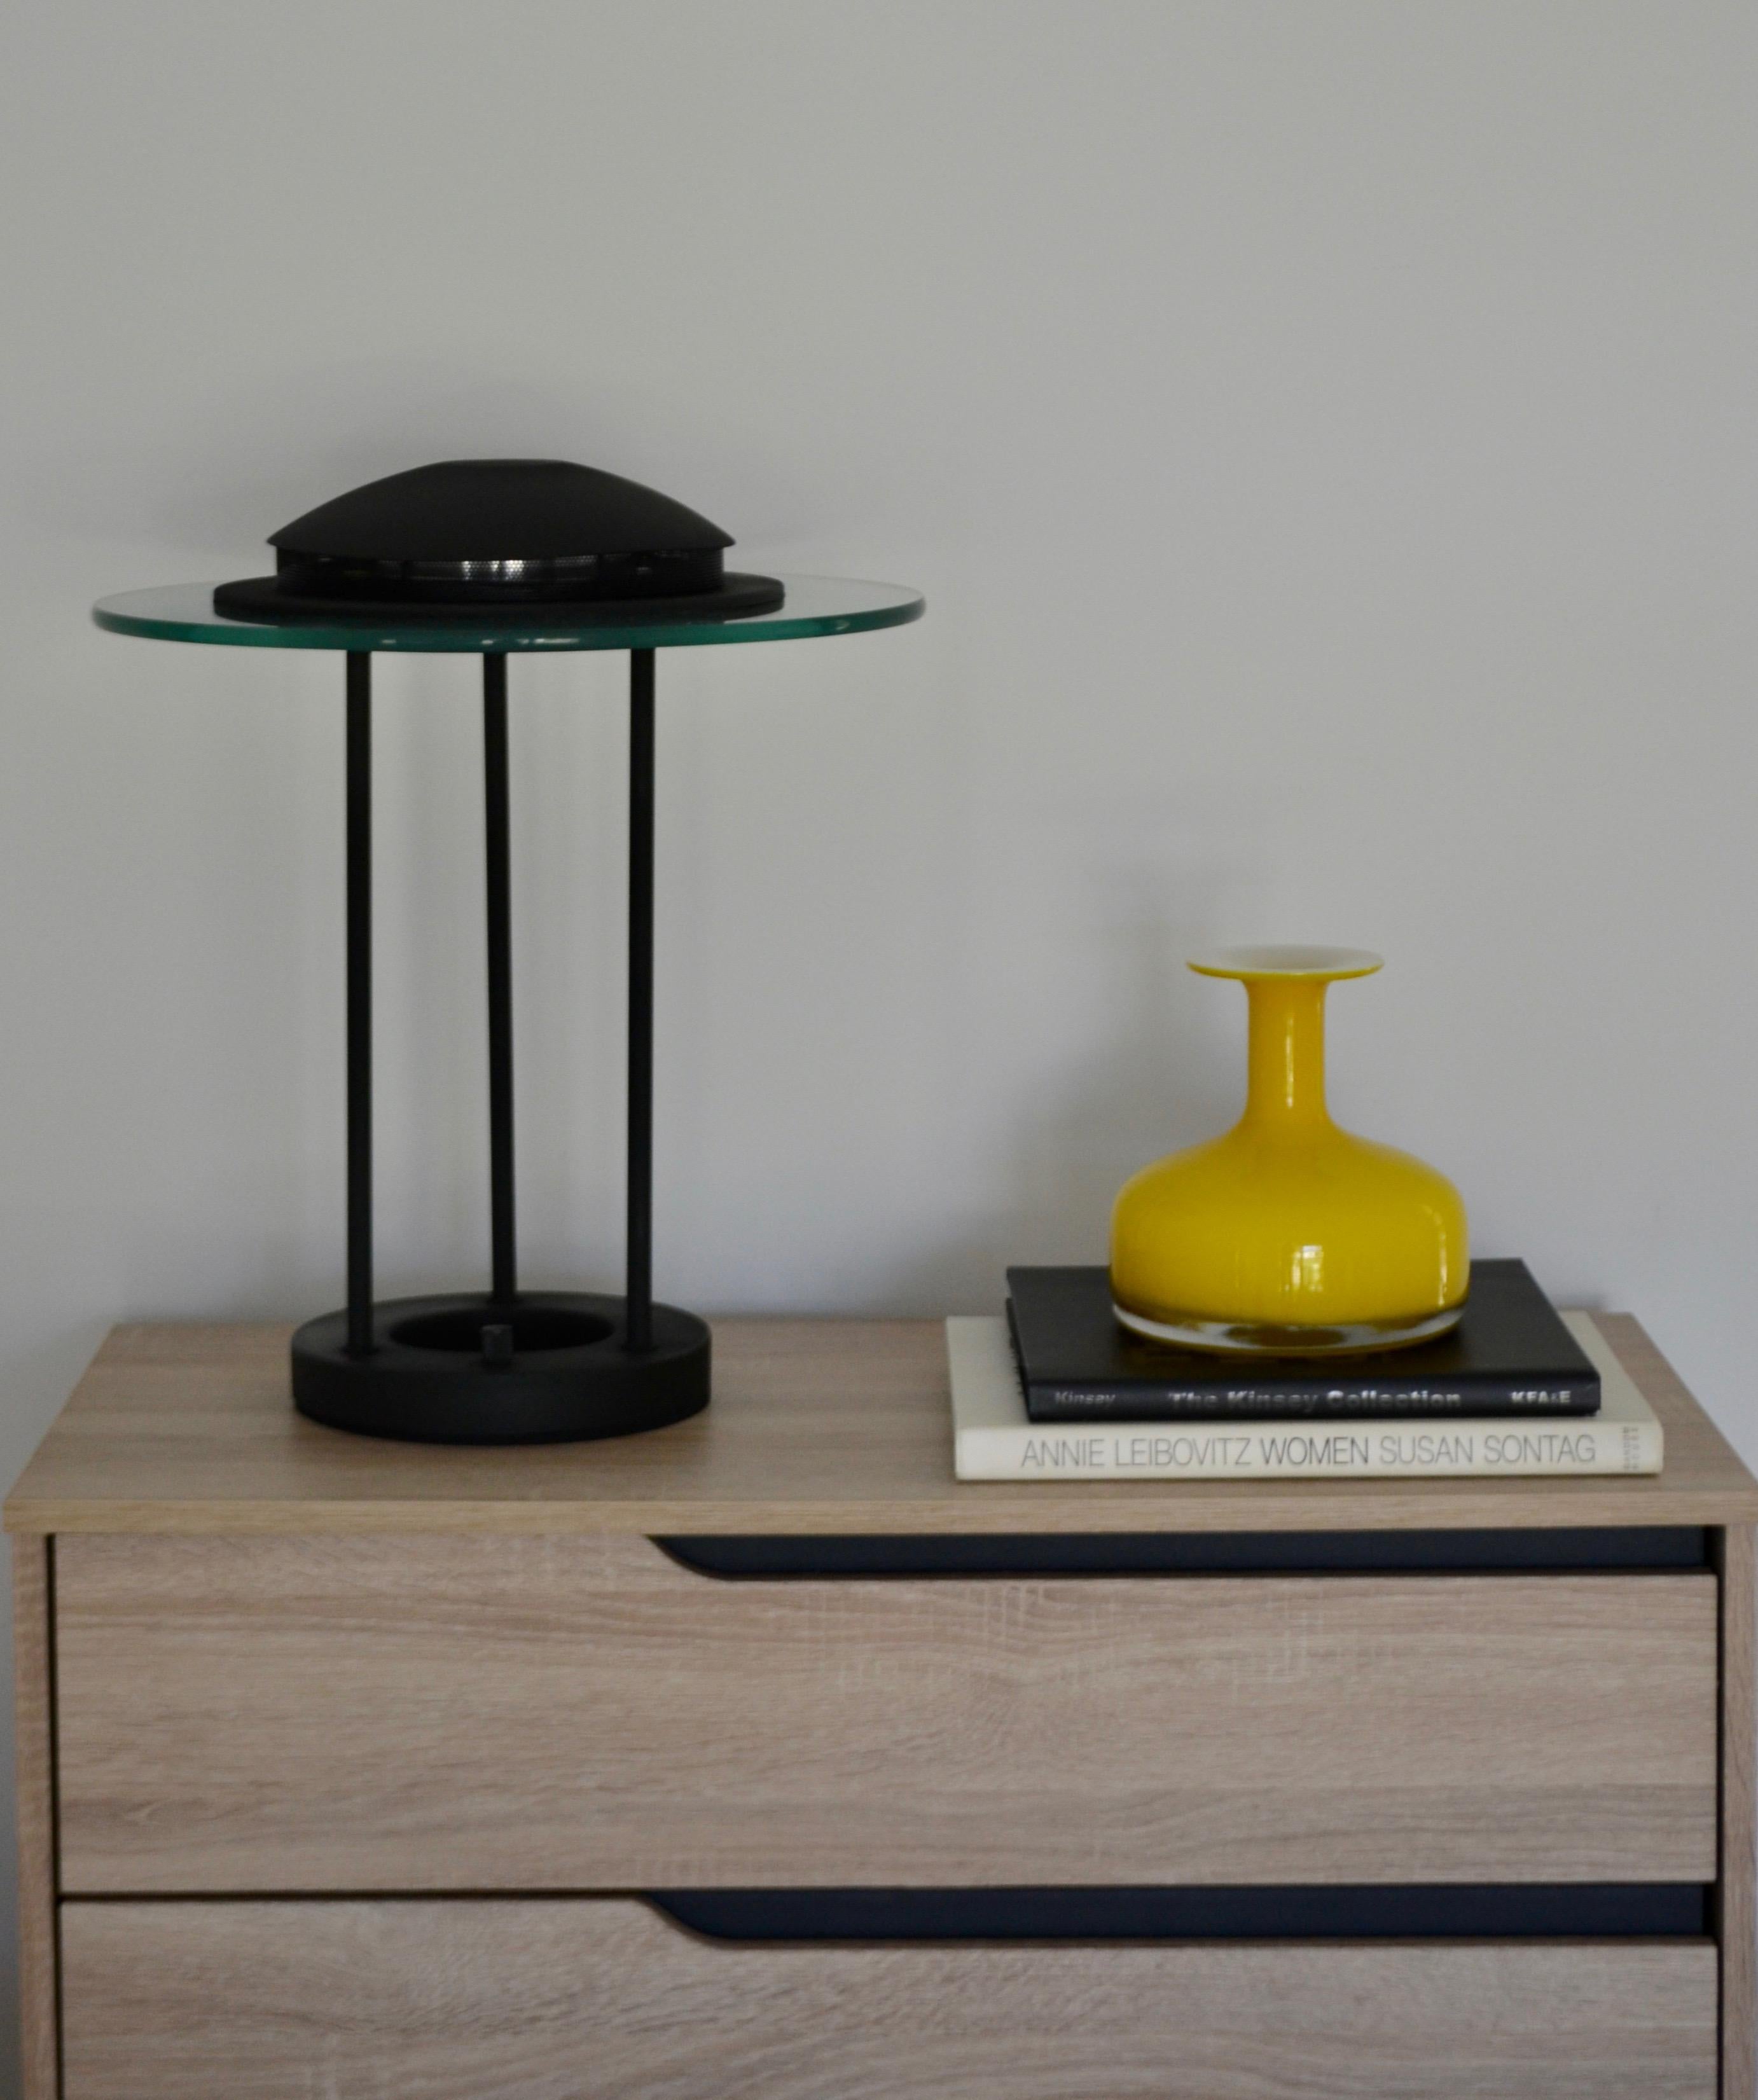 Striking Postmodern matte black table lamp, circa 1980s. This sculptural lamp is designed of lacquered metal with a sleek glass disc integrated into the dome-shaped top of the form. Dimmable halogen lightbulb.
Measurements: 18.5